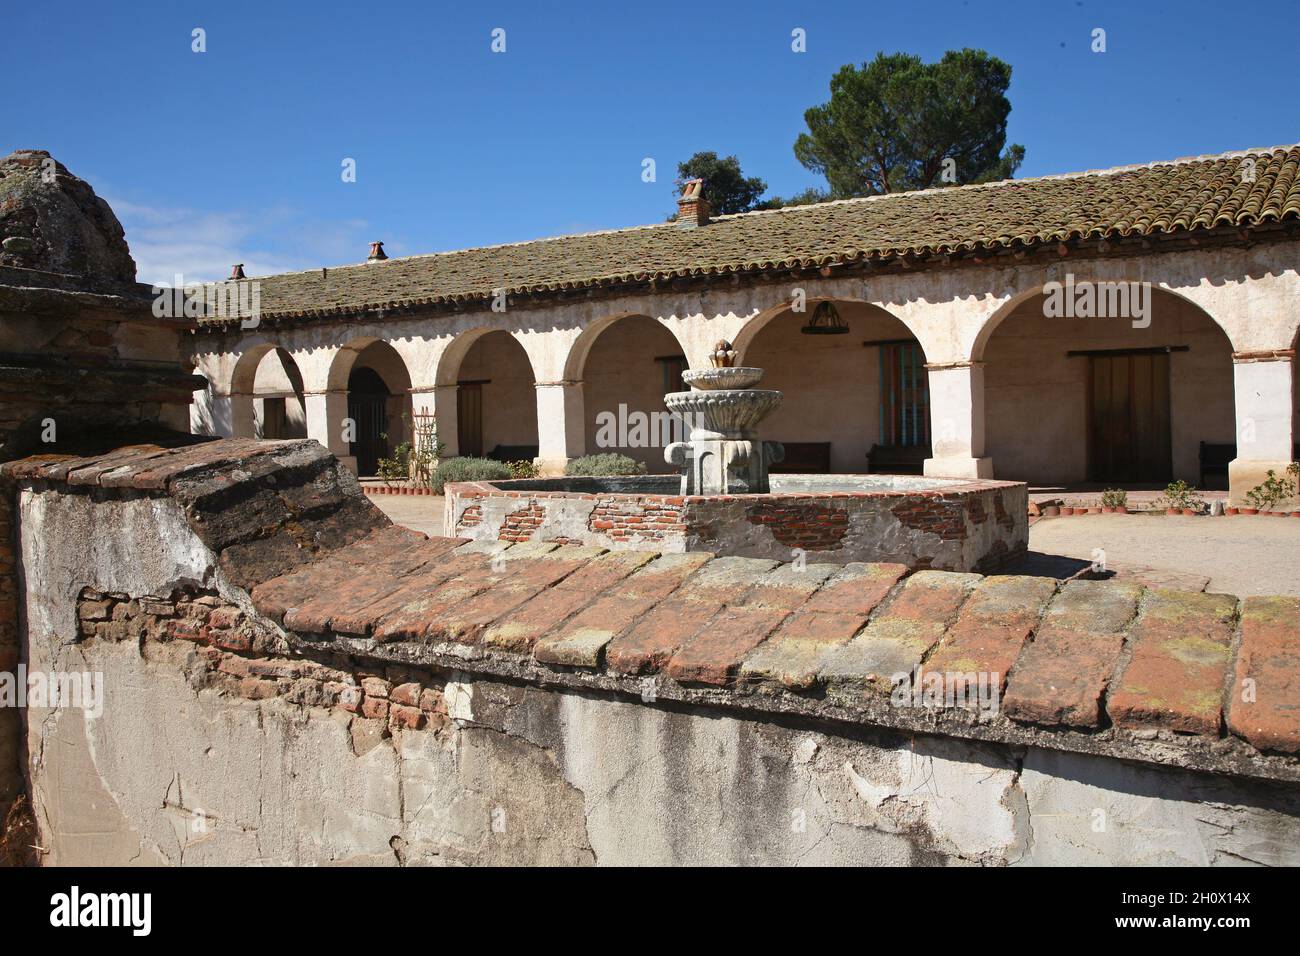 Mission San Miguel Arcangel along 101 freeway in California Stock Photo